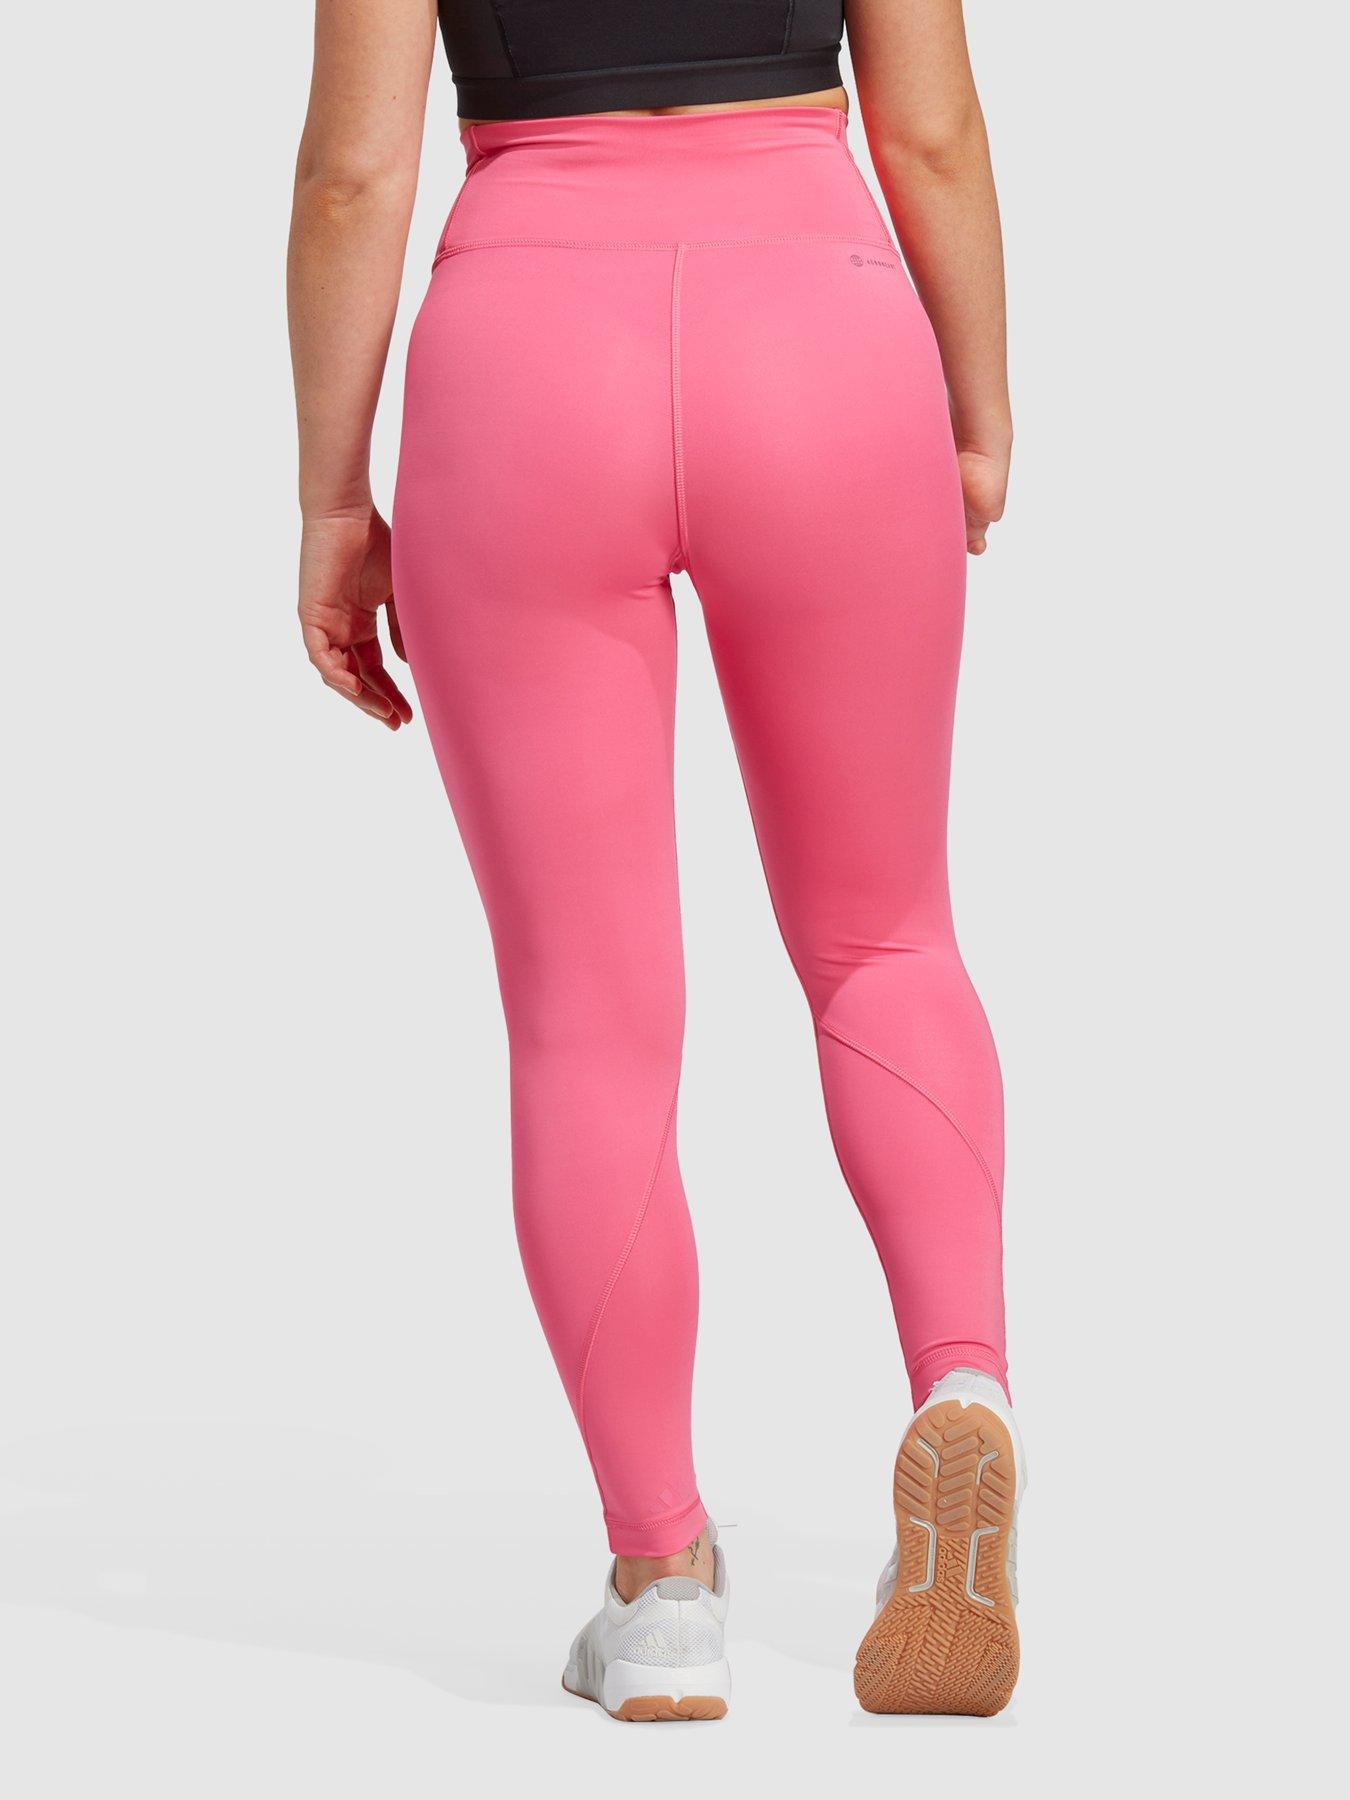 Optime Training Luxe 7/8 Tights